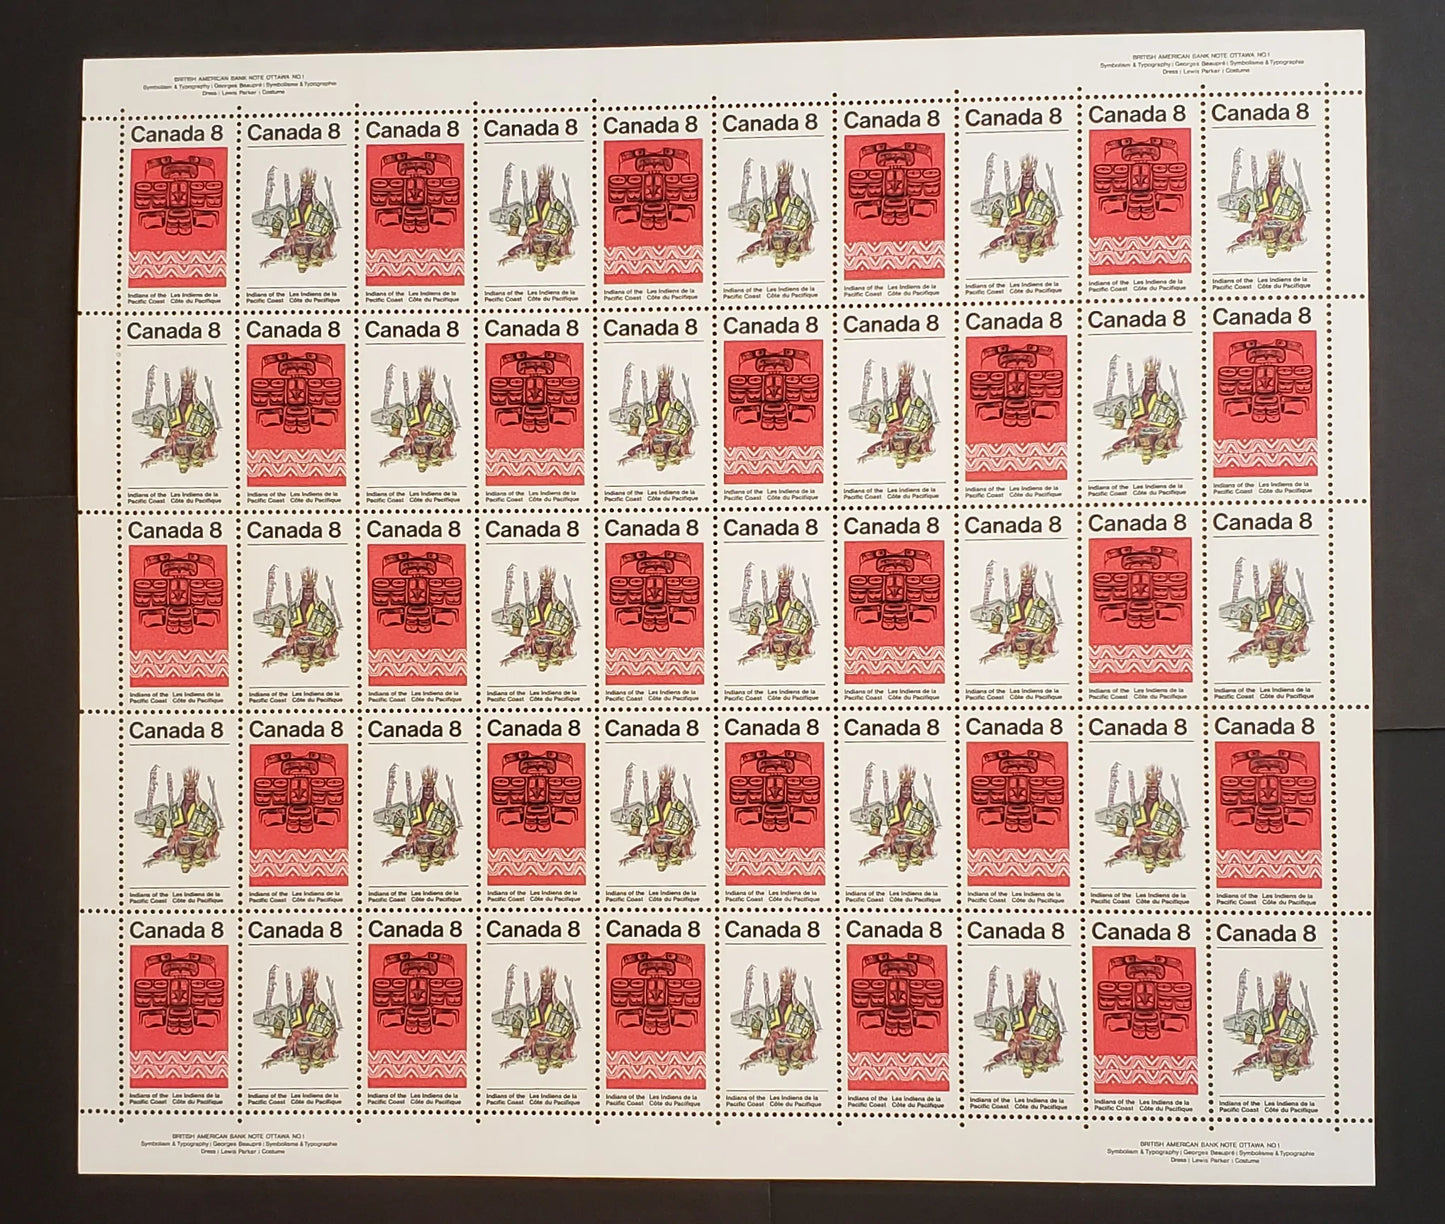 Lot 9 Canada #572-573 8c  Multicoloured Chief & Thunderbird, 1974 Pacific Coast Indians Issue, Philatelic Stock Sheet Of 50, DF/NF-fl, LF, S, WP, VS Smooth Paper, VF-80 NH, Unfolded,  Unitrade Cat. As Singles $22.5, The Paper Is Listed As Dull